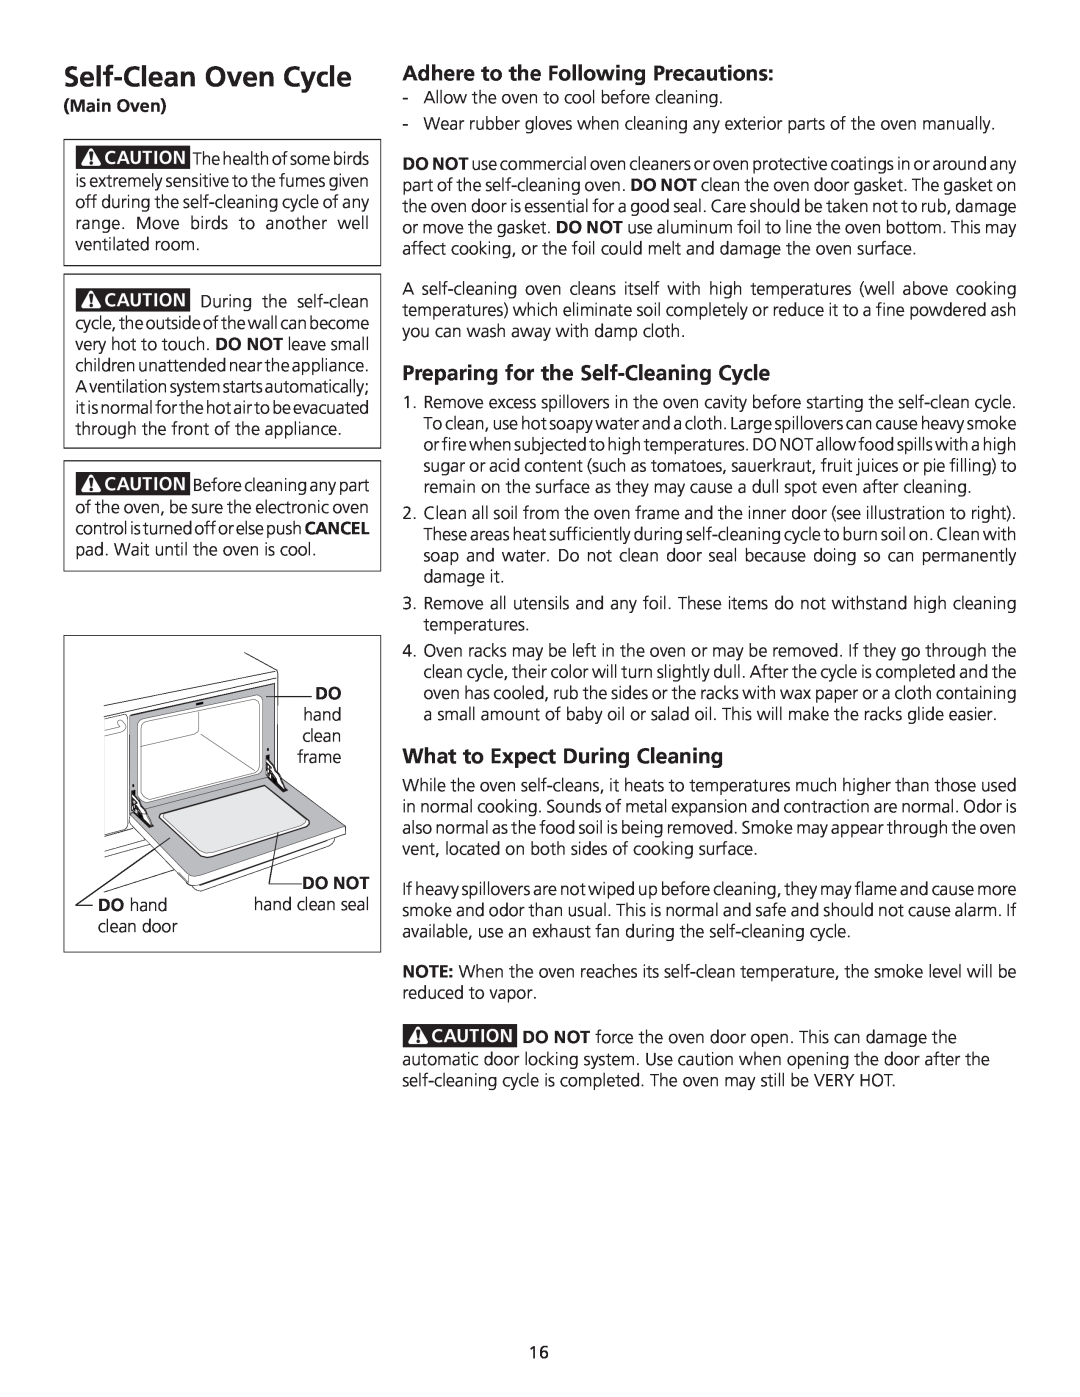 Frigidaire 318200710 Self-CleanOven Cycle, Adhere to the Following Precautions, Preparing for the Self-CleaningCycle 